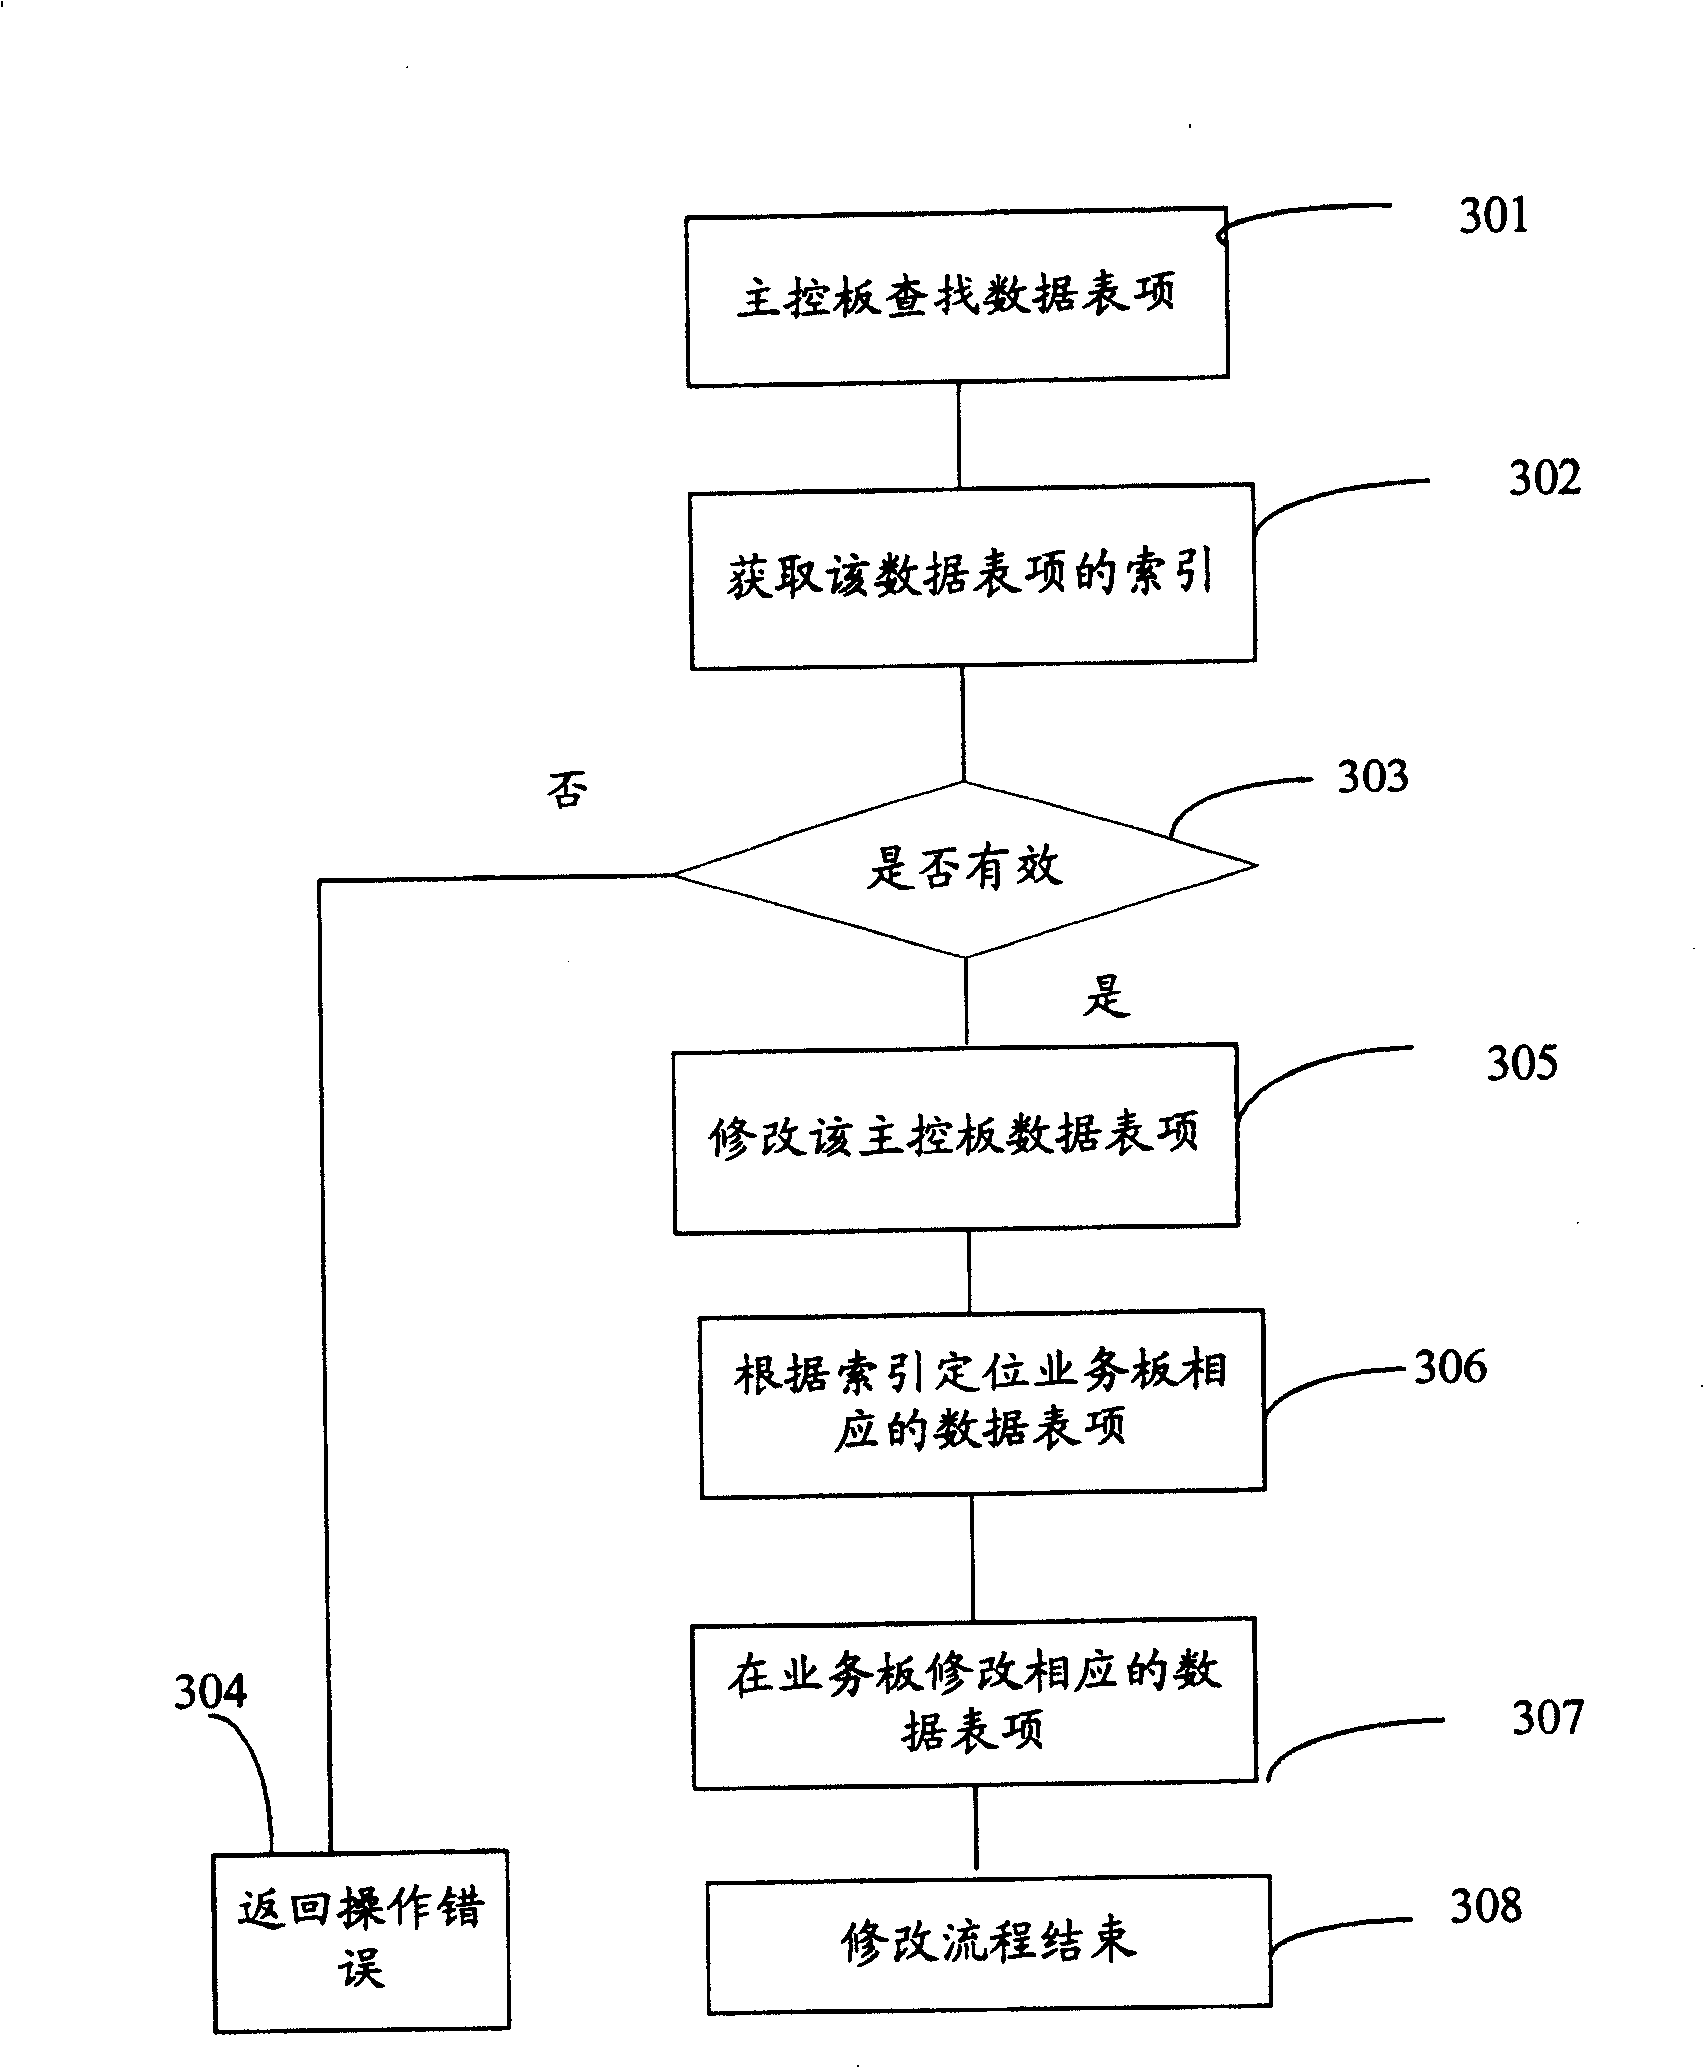 Method of data query and method of inter-board data synchronization in distributed system